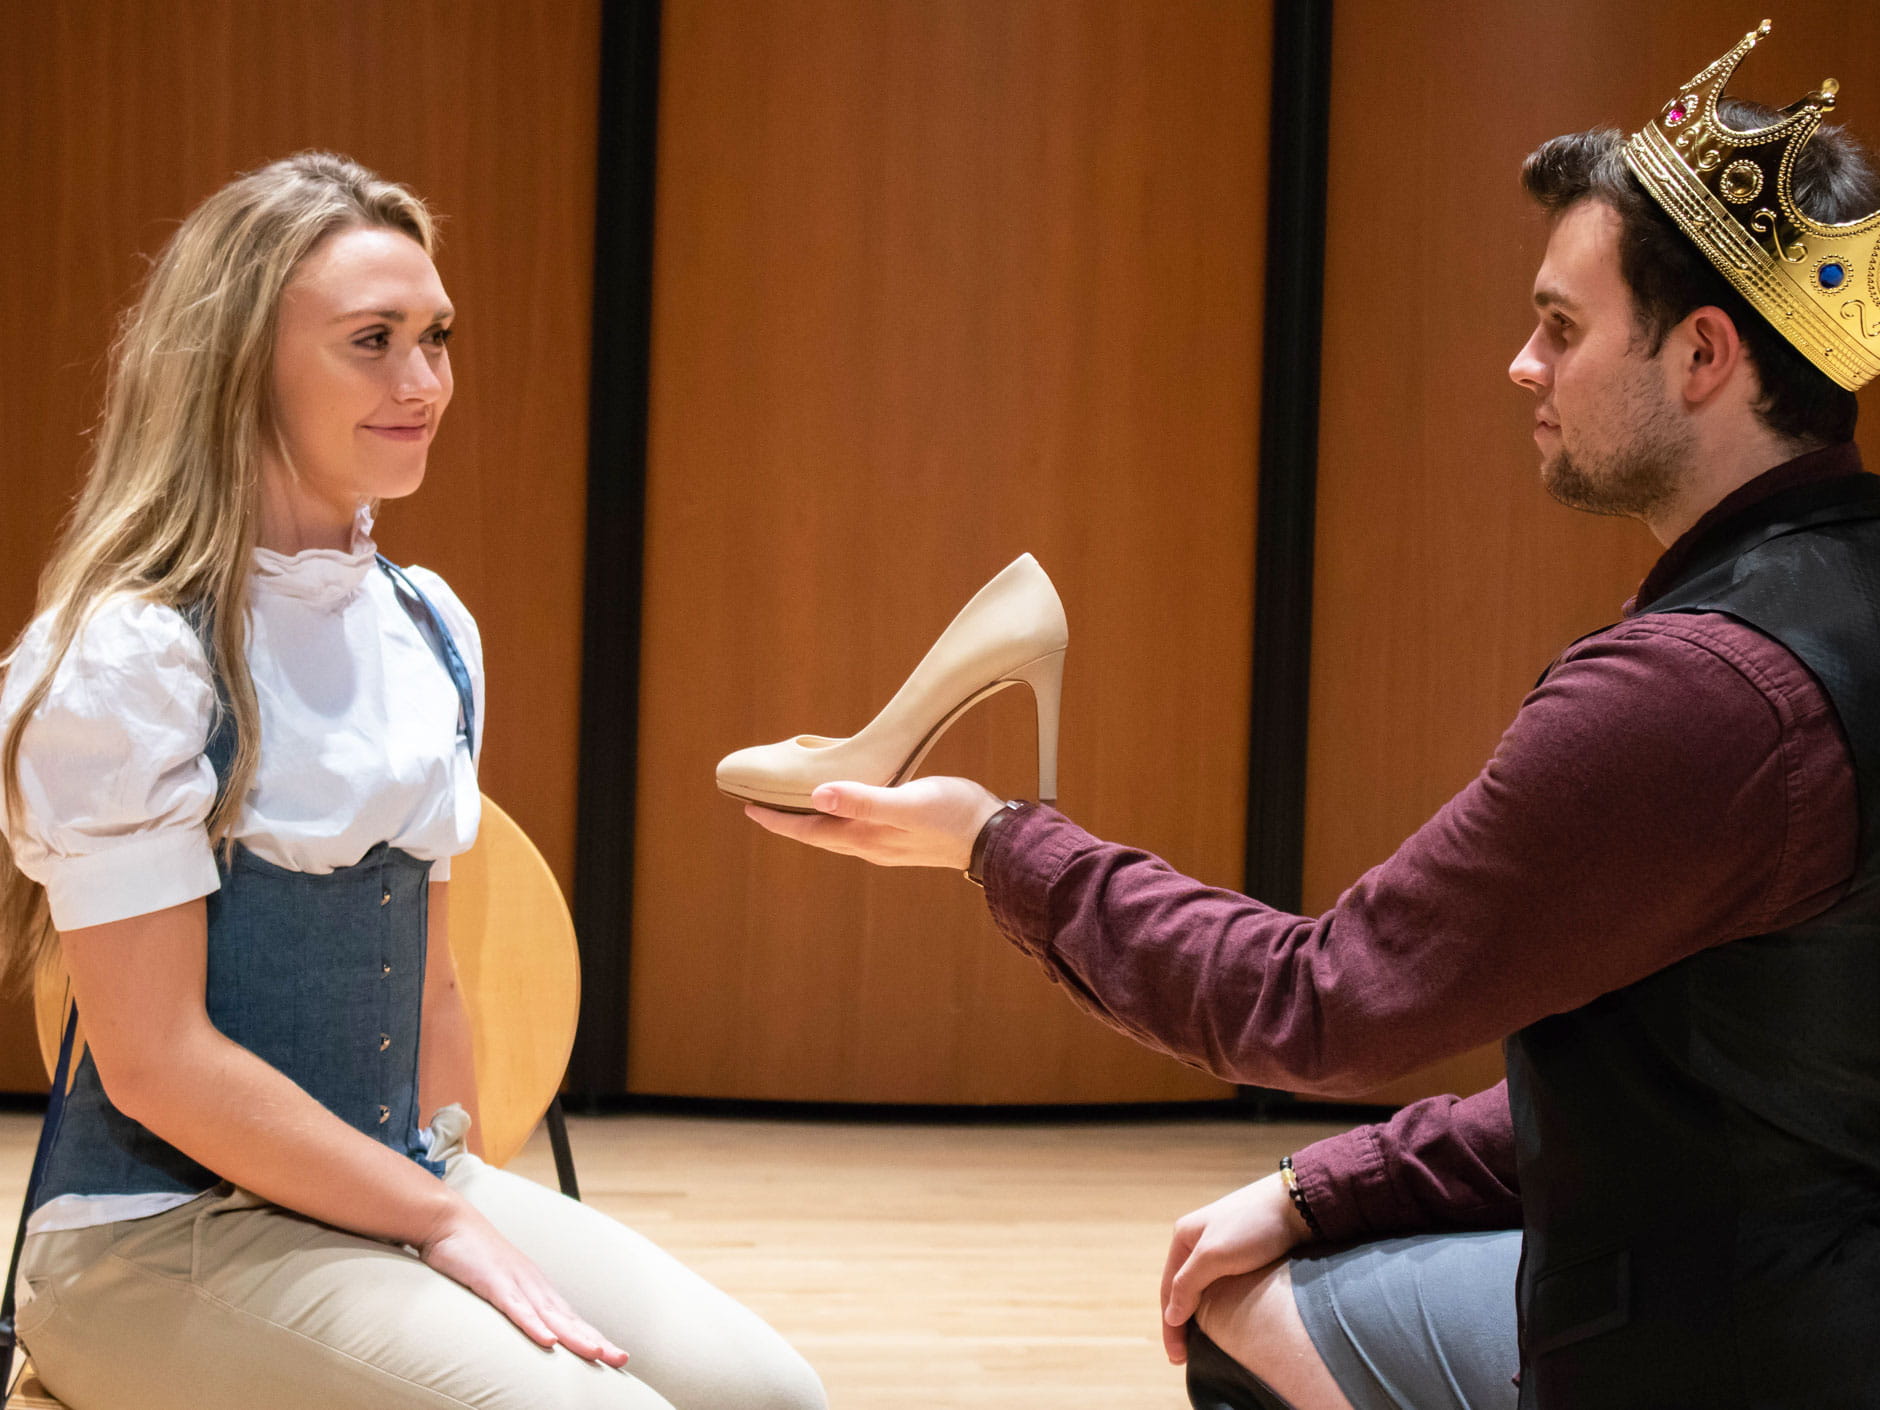 Two actors perform a scene from Into The Woods. Cinderella (played by Meaghan DelGenio) is presented her missing slipper by the proud Prince (Michael Varno). Photo credit: Nicole Sigrist